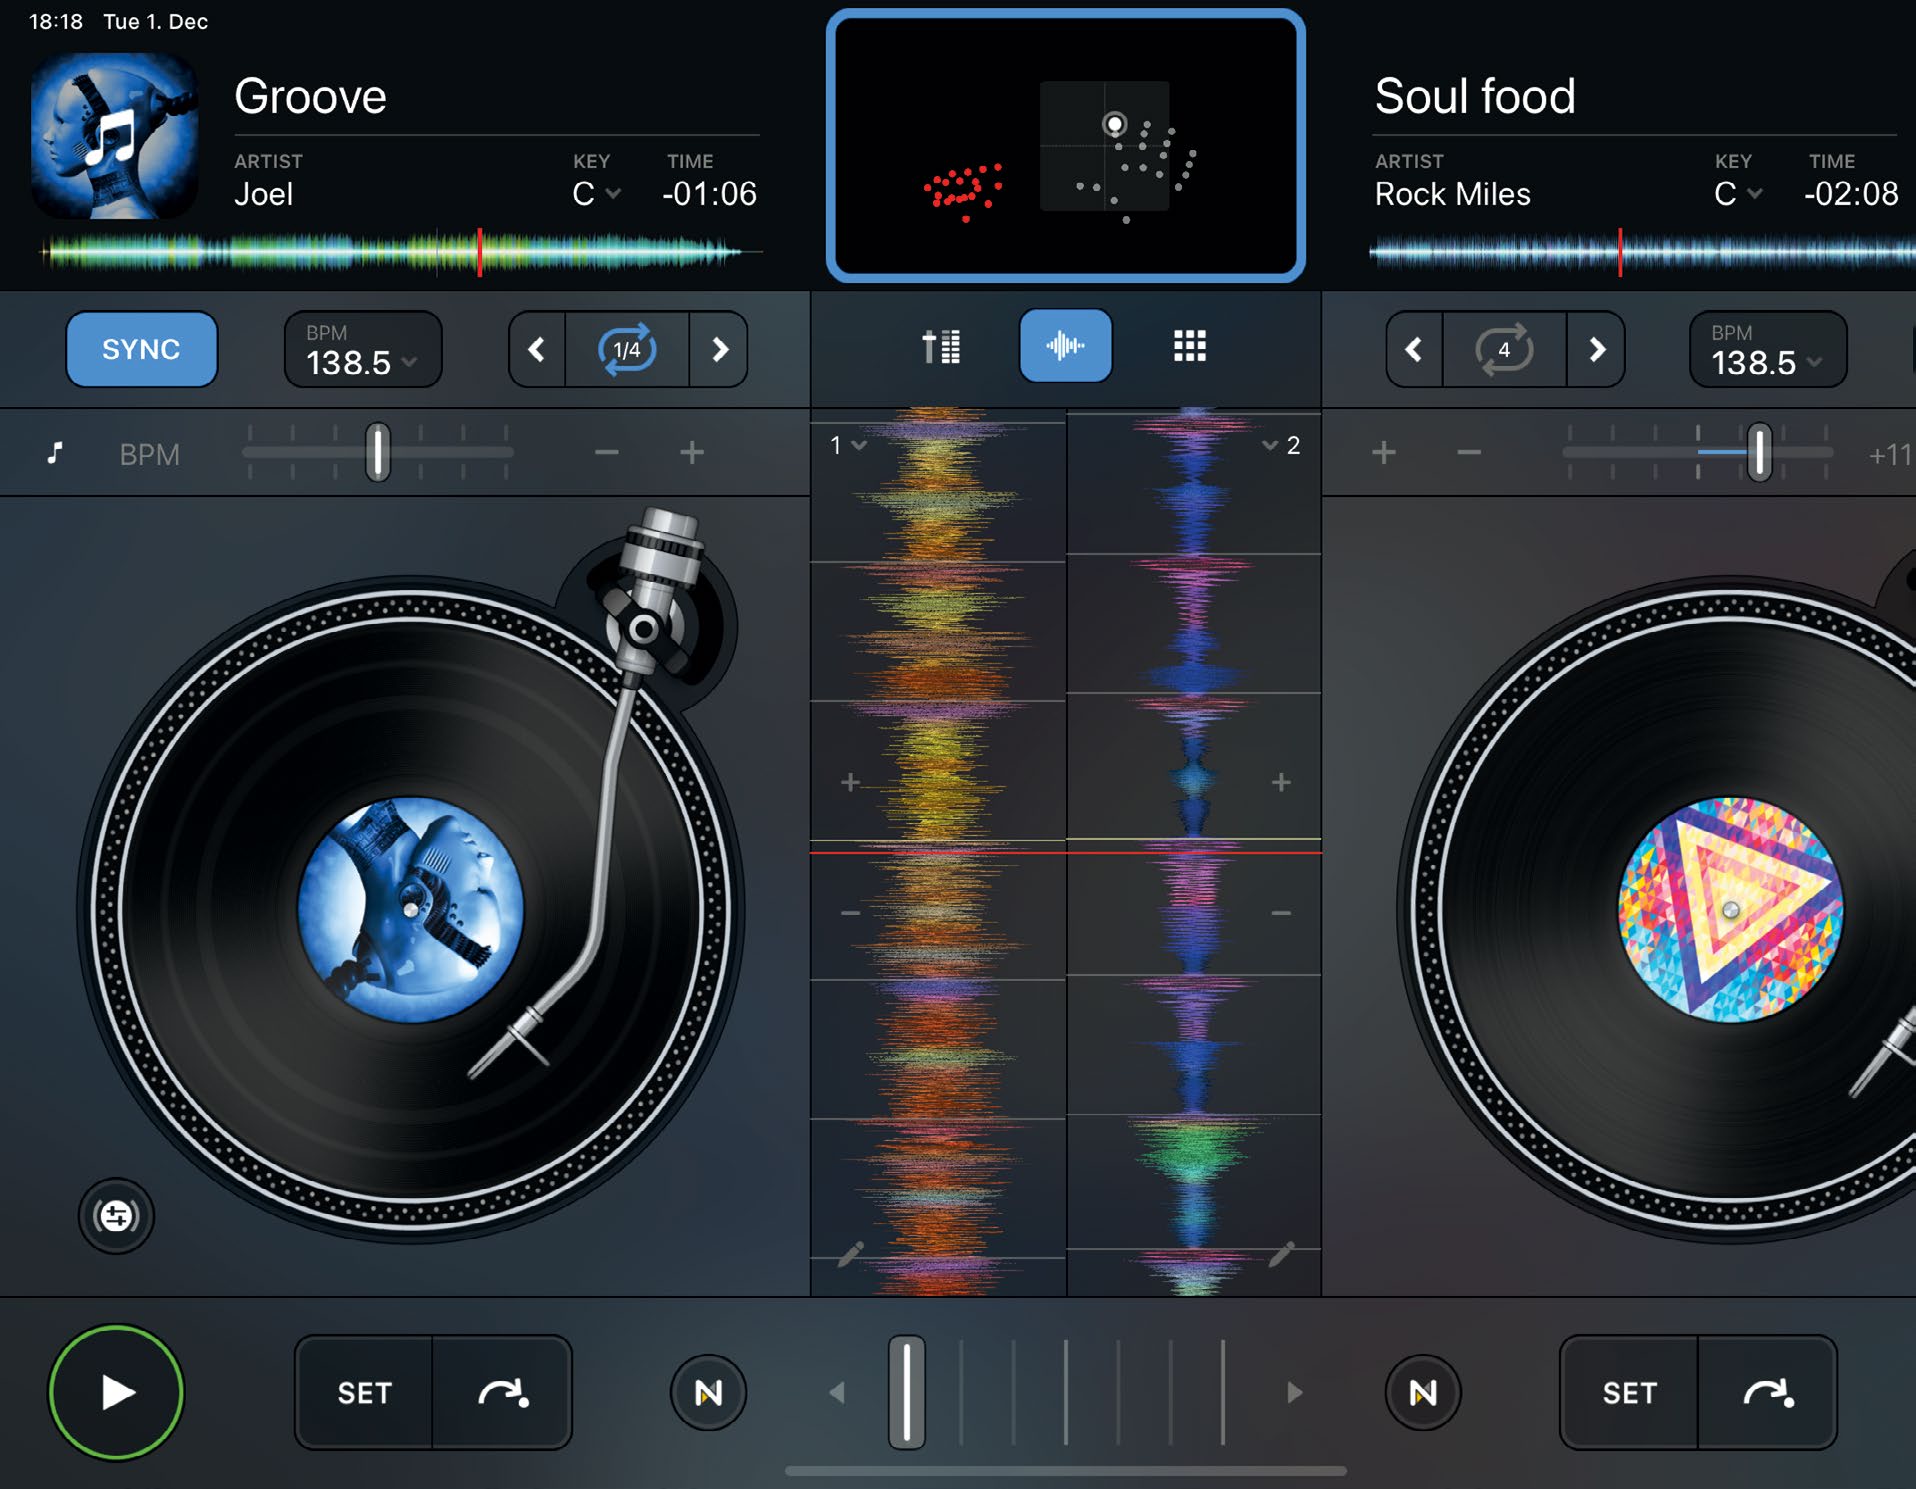 download the last version for windows djay Pro AI